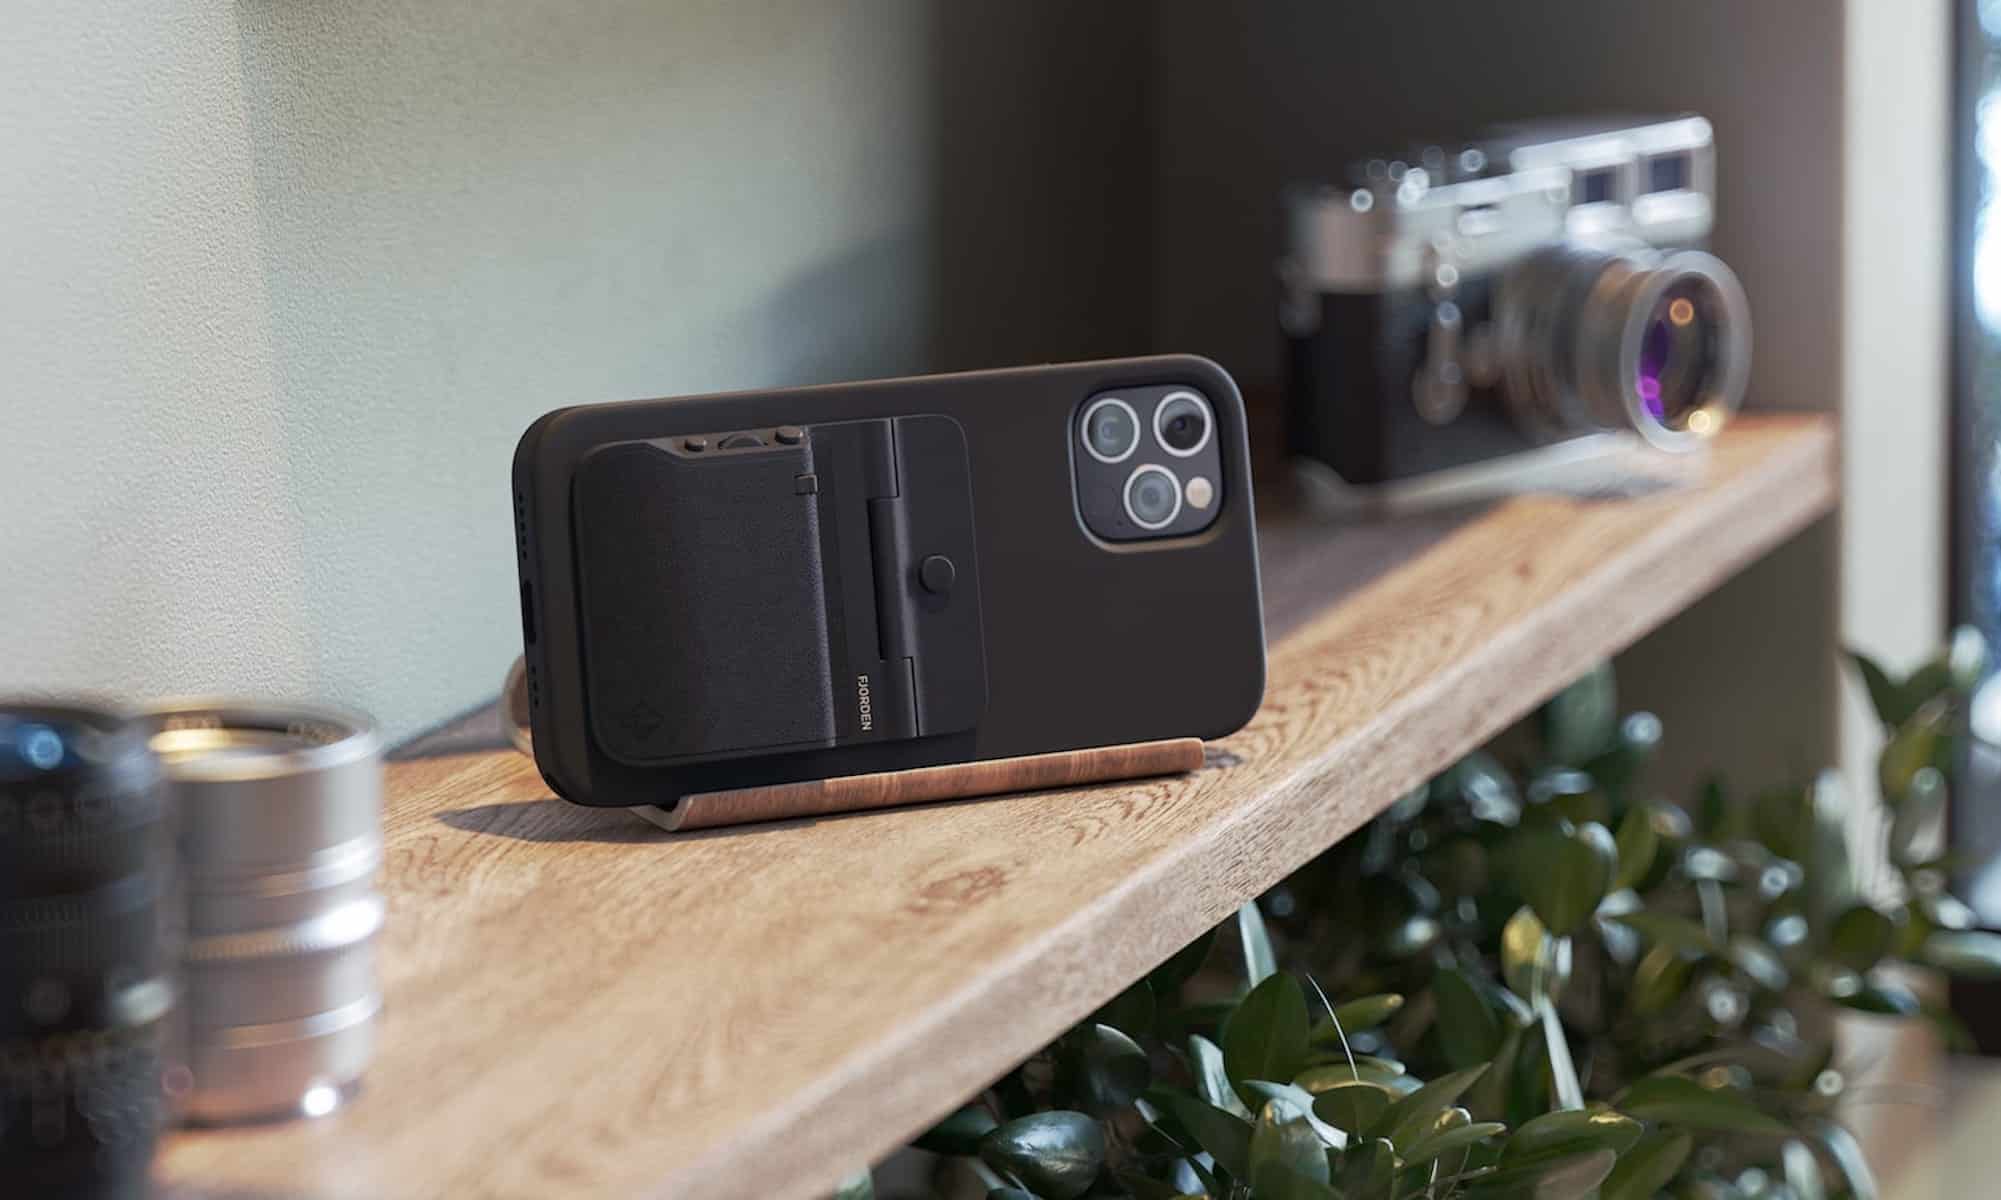 This pocketable iPhone camera grip makes your iPhone feel just like a real camera